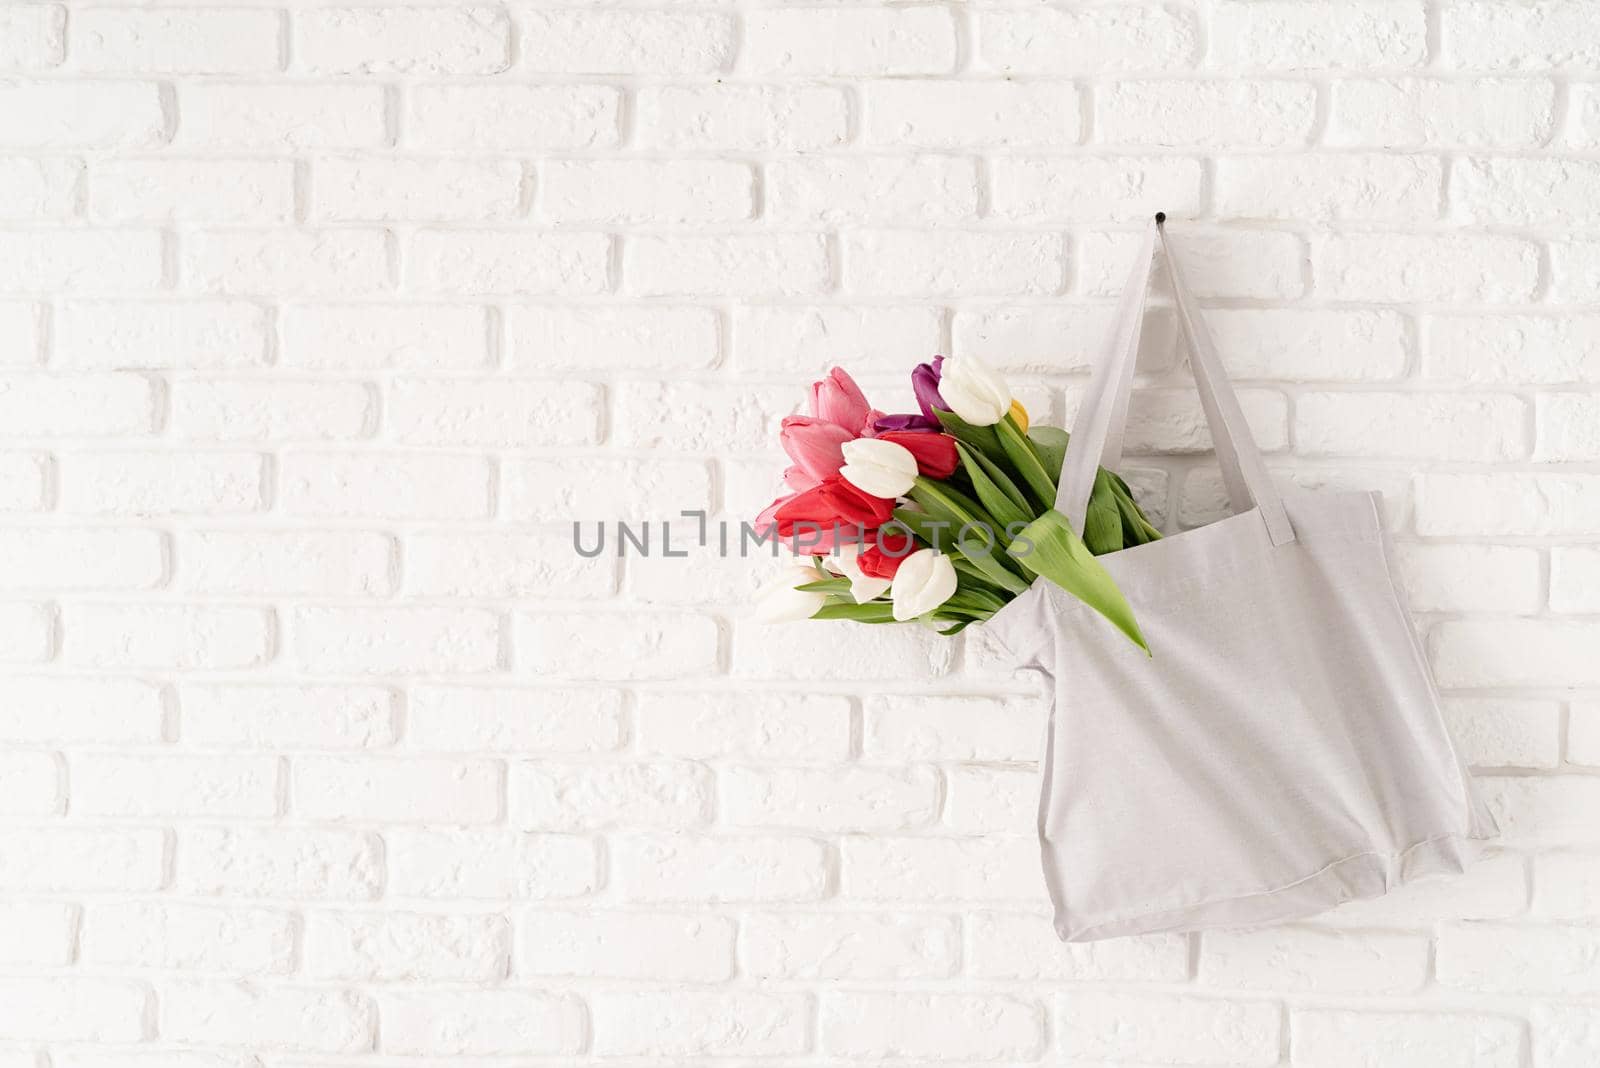 Eco friendly, zero waste concept. Gray fabric bag full of colorful tulips on white brick background